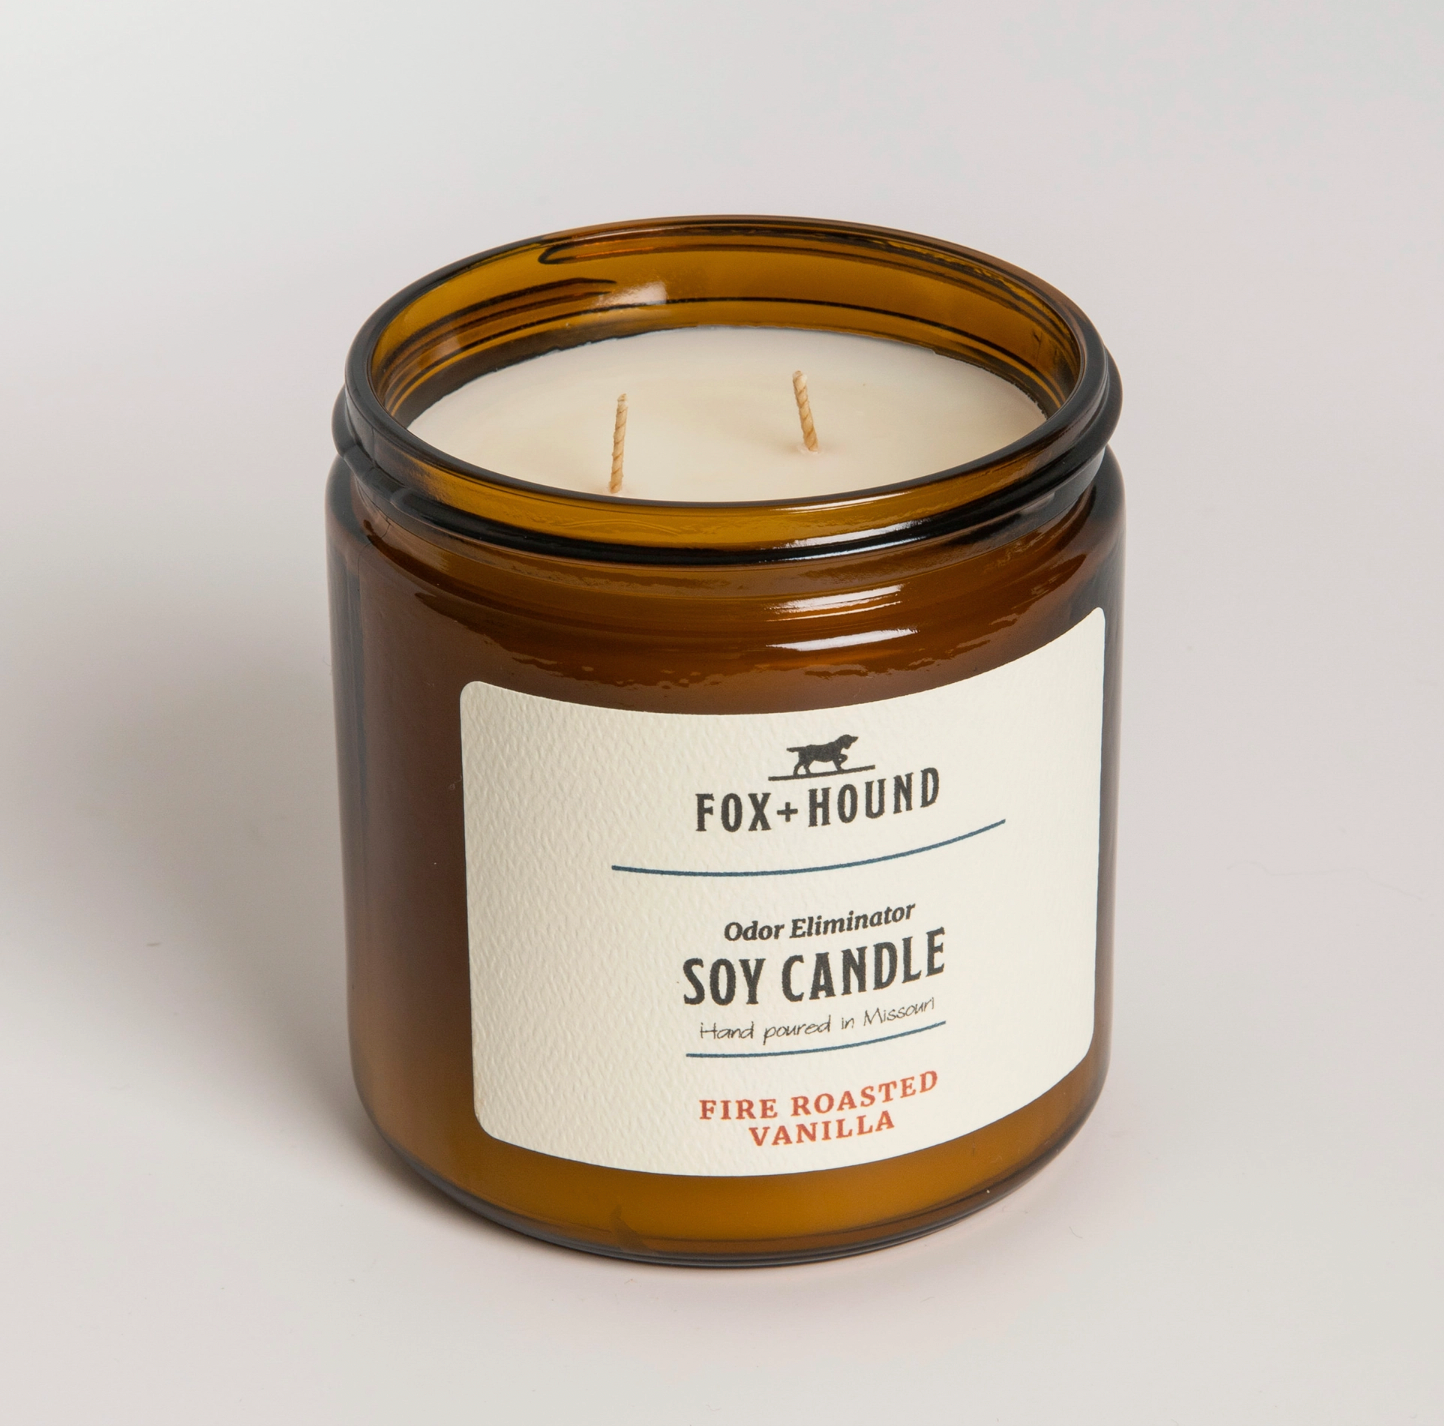 Fox and Hound Odor Eliminator Soy Candle